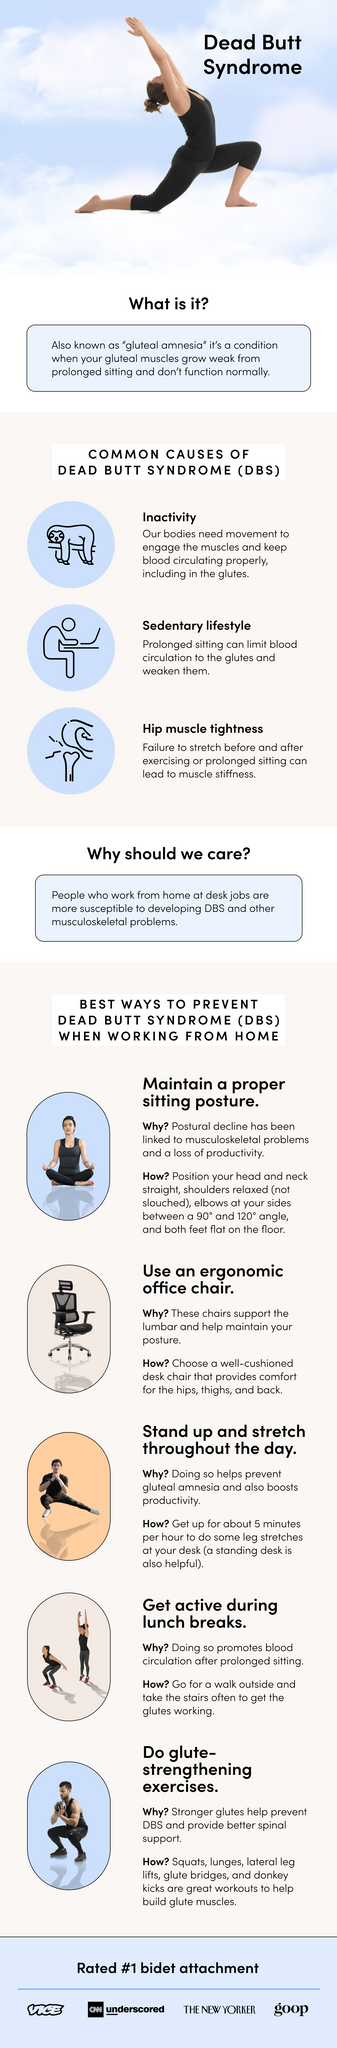 Dead butt syndrome